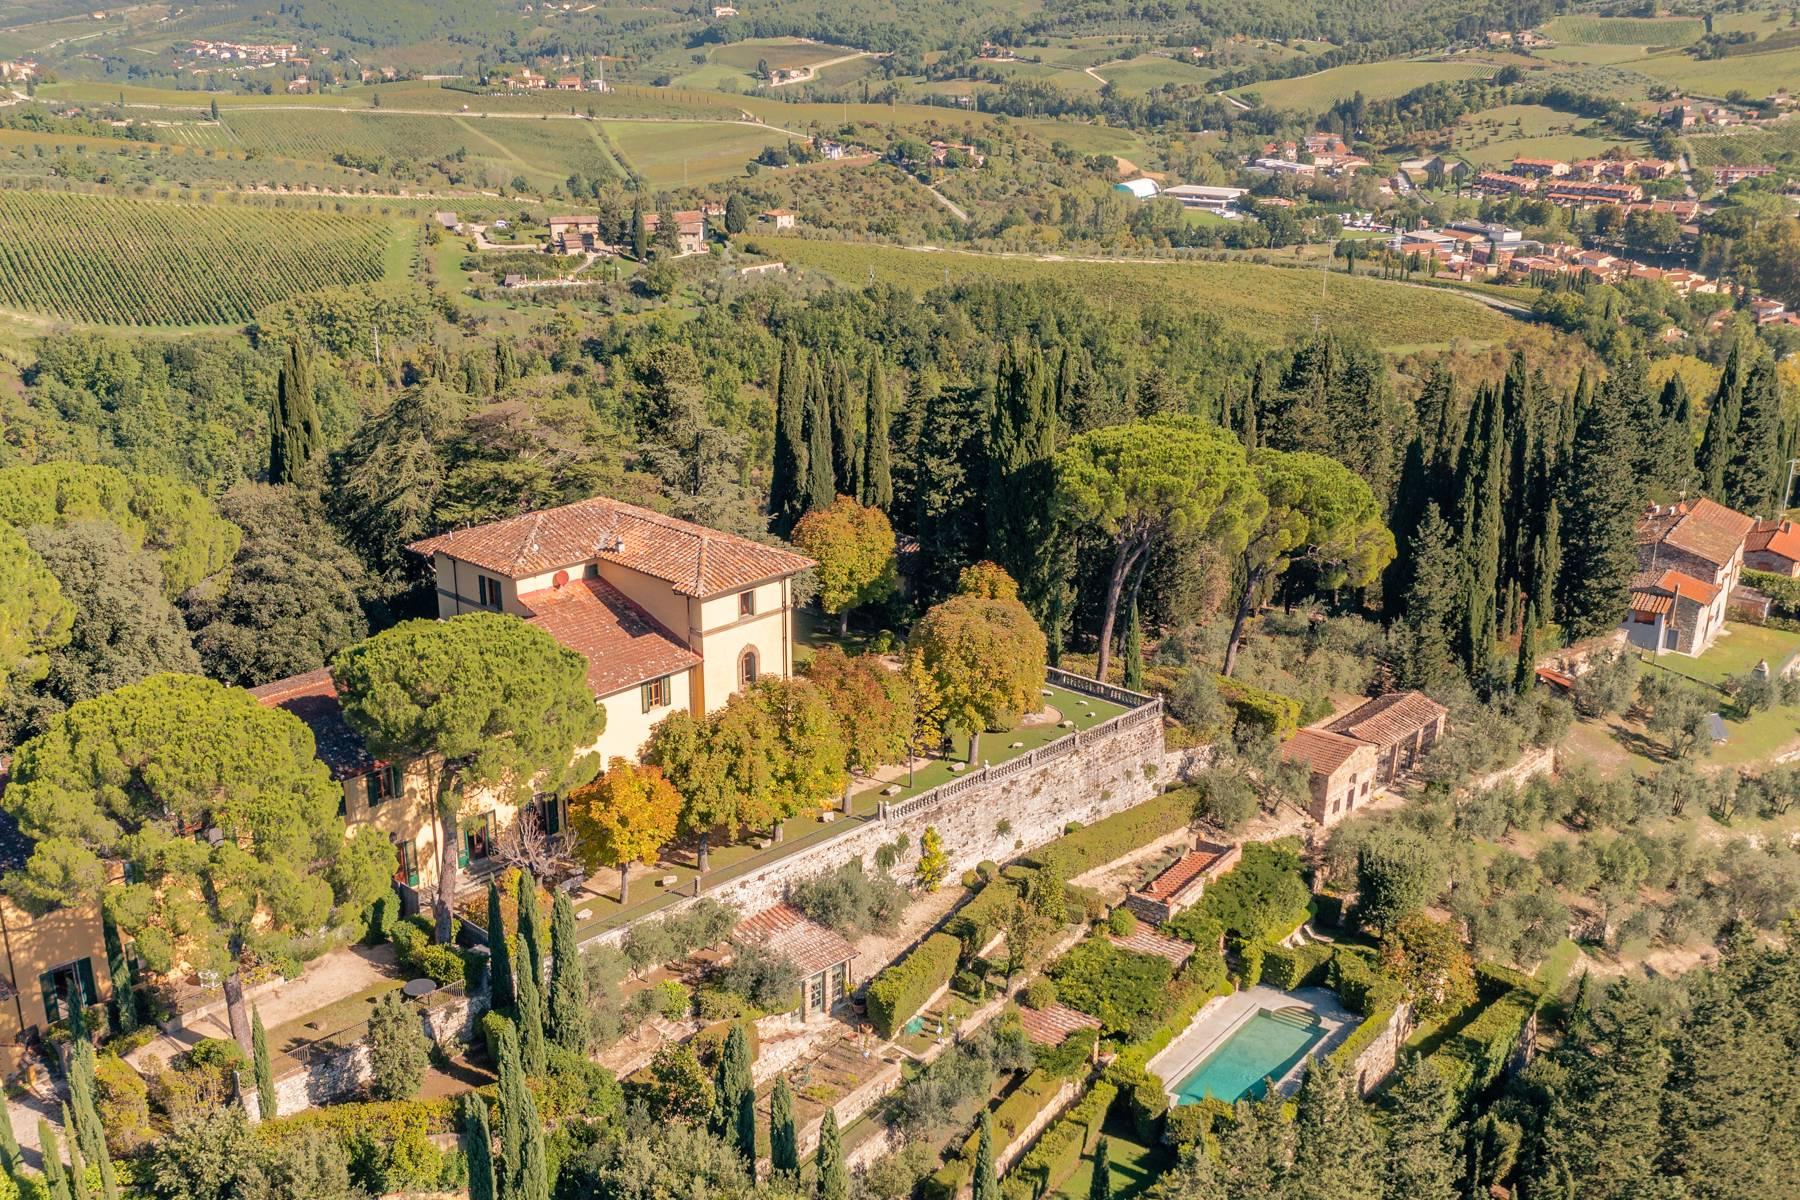 Superb estate with 2 pools, olive grove, and stunning views over the Chianti valley - 9